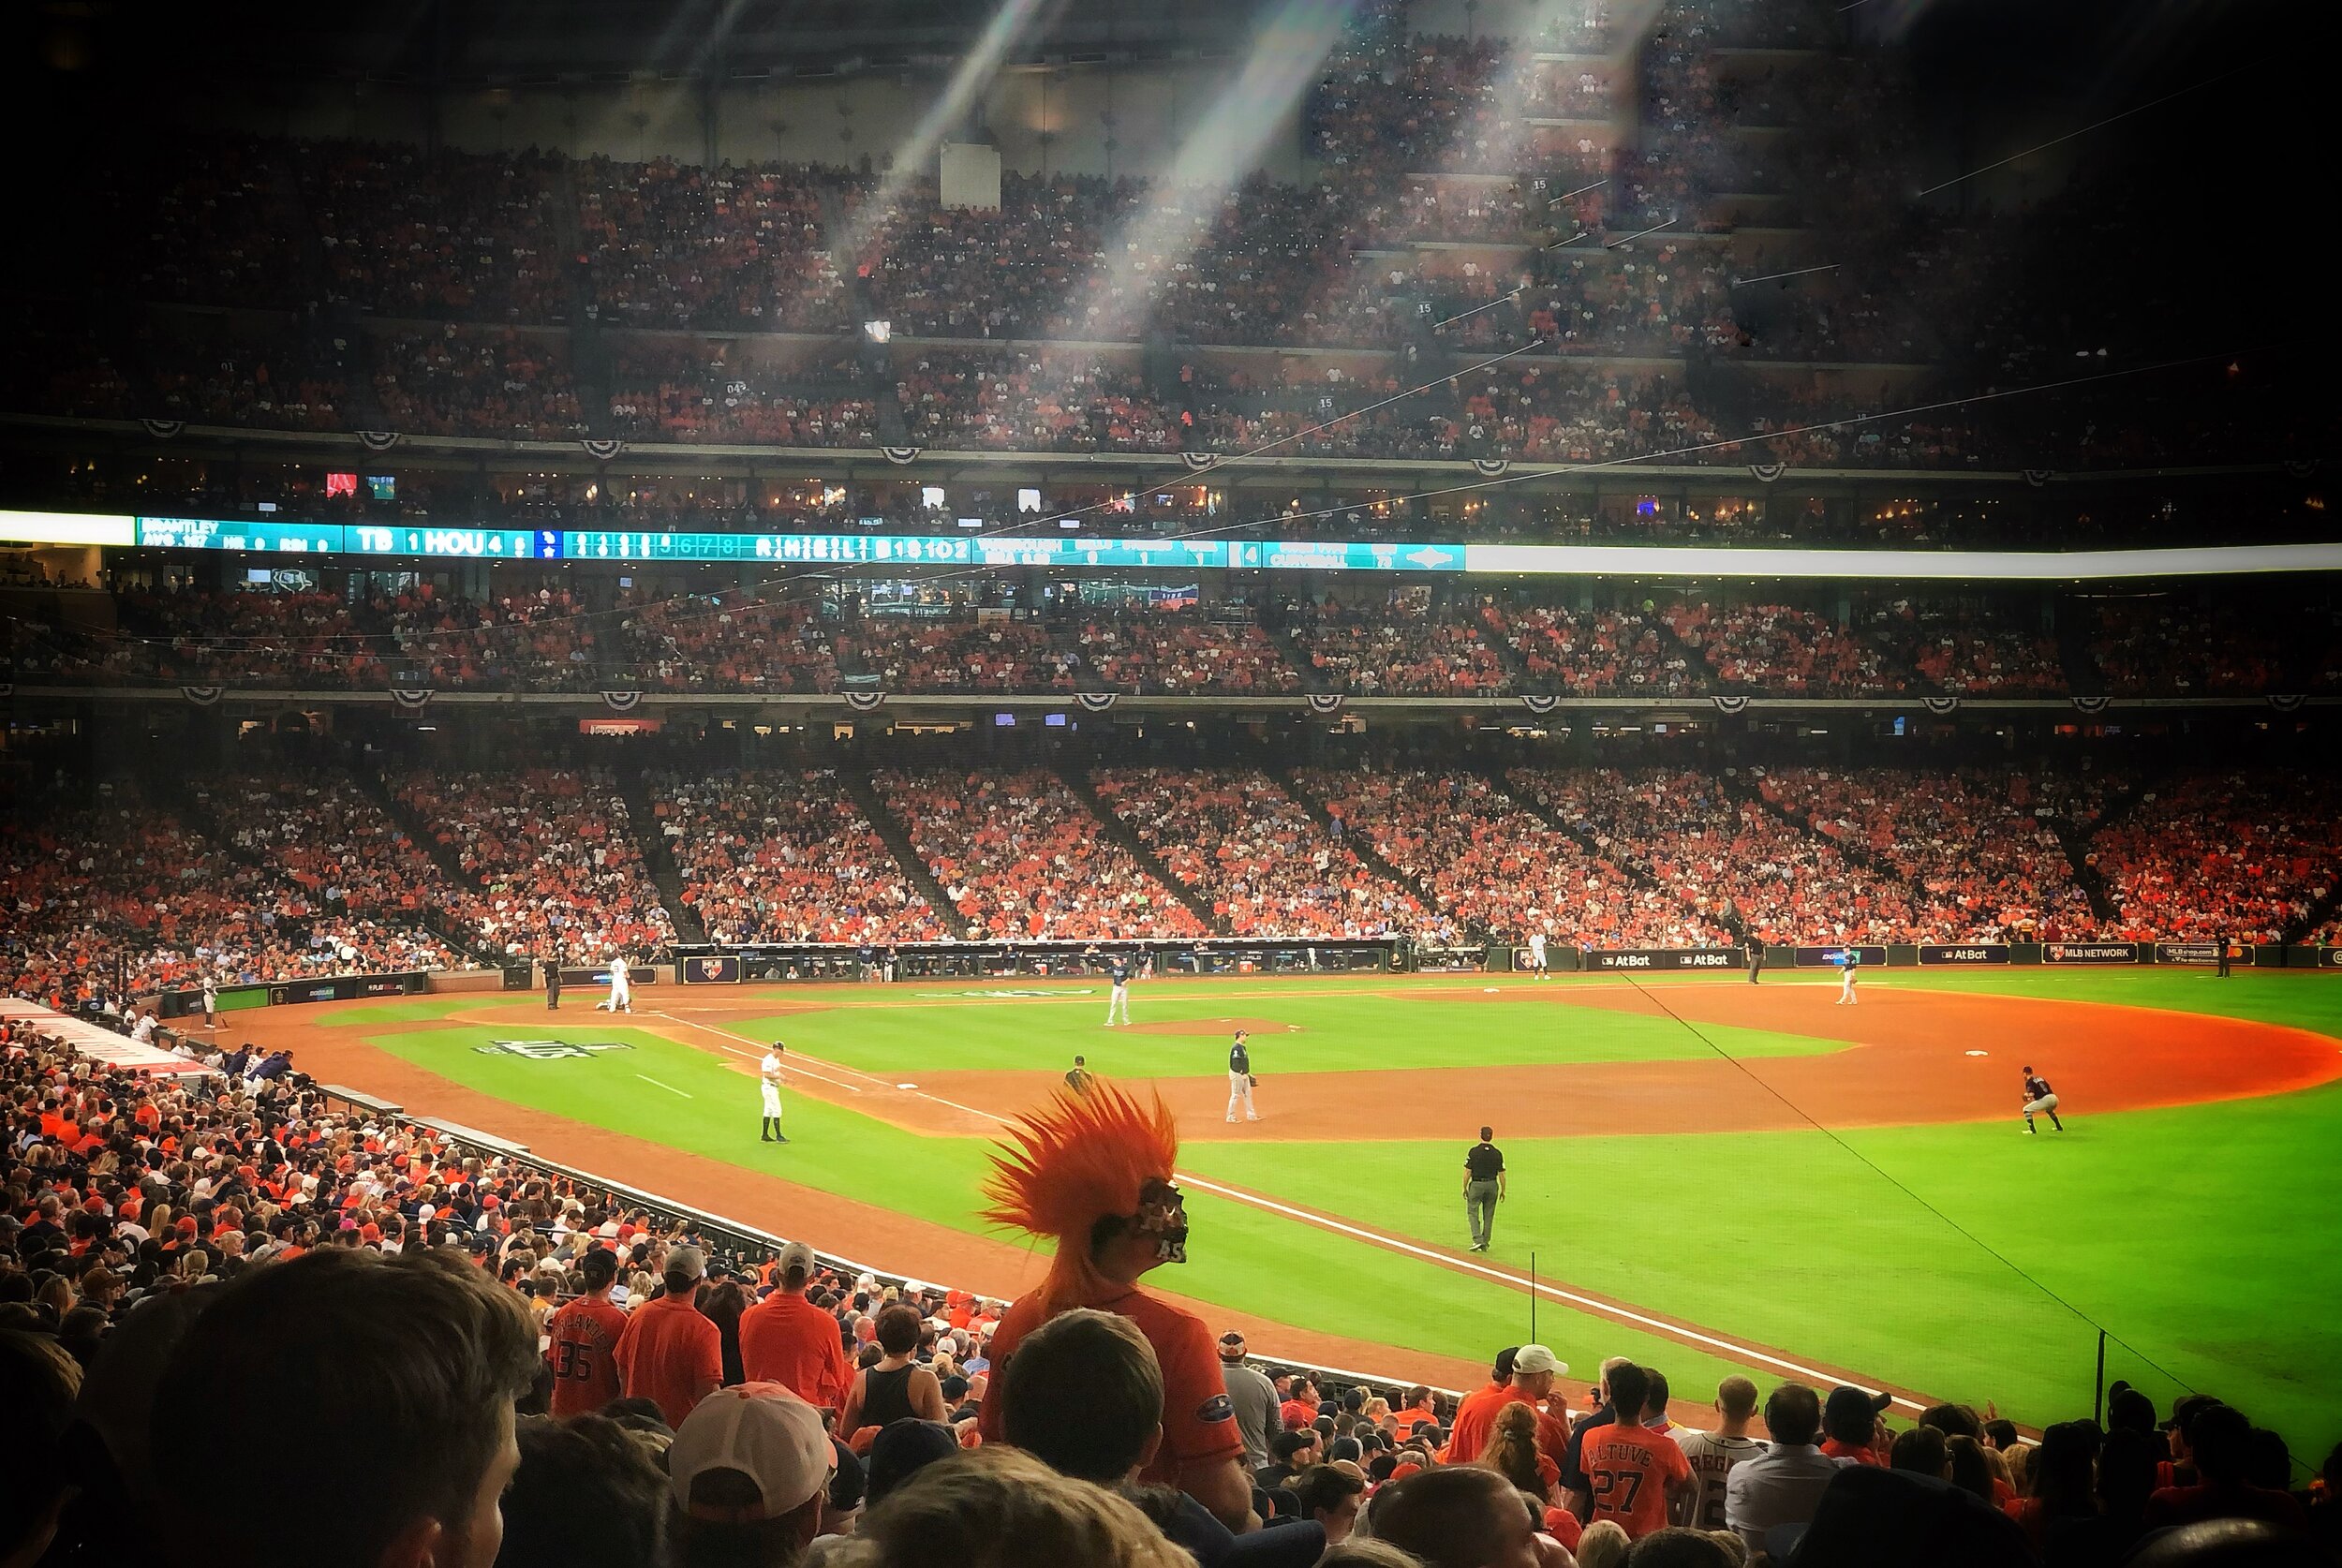 10 best Houston Astros fashion finds for fans to gear up for the playoffs -  CultureMap Houston